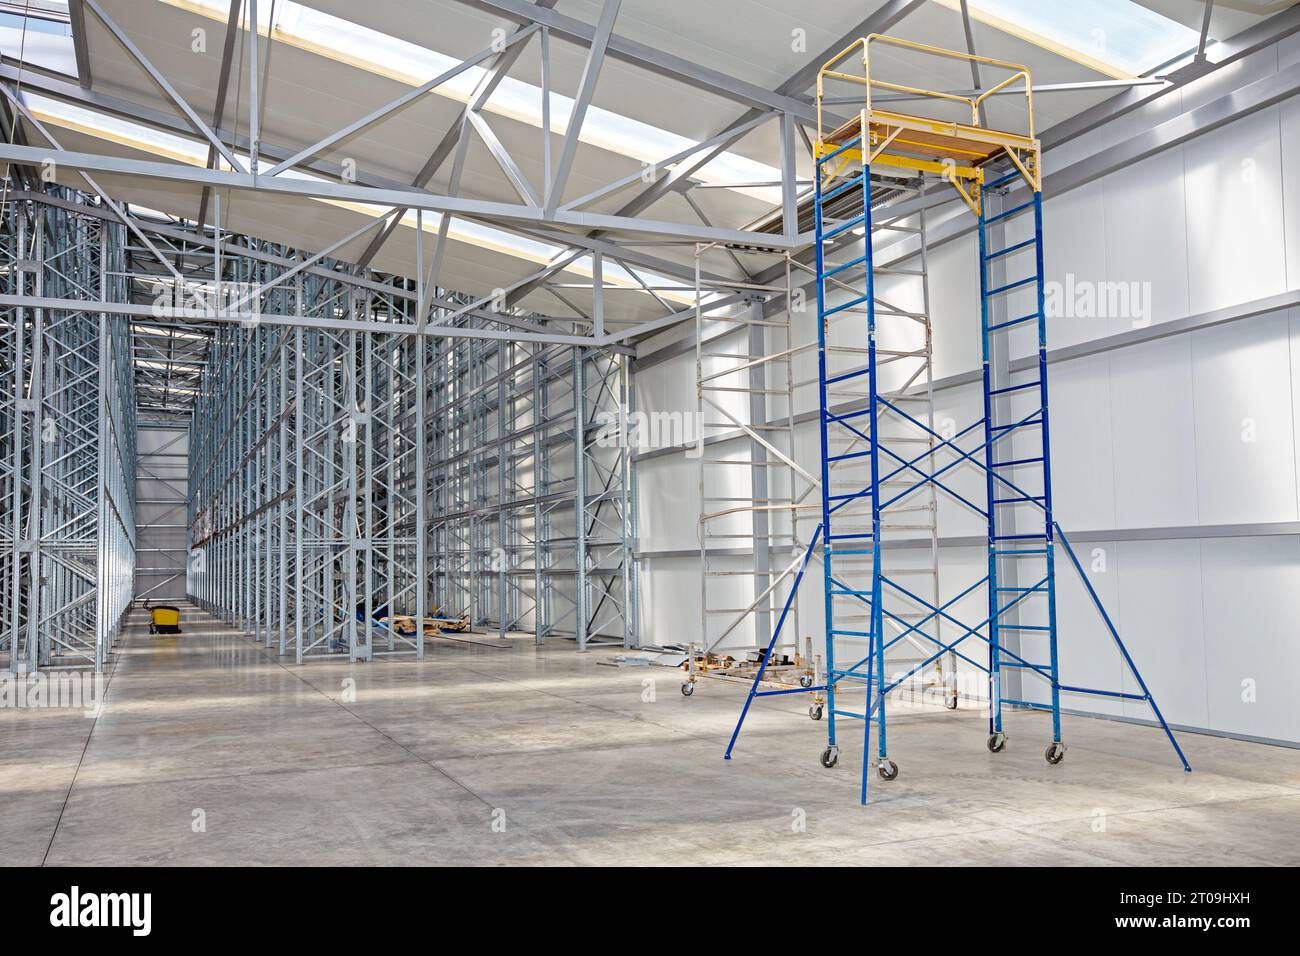 Mobile Scaffolding Tower Platform in Distribution Warehouse Stock Photo